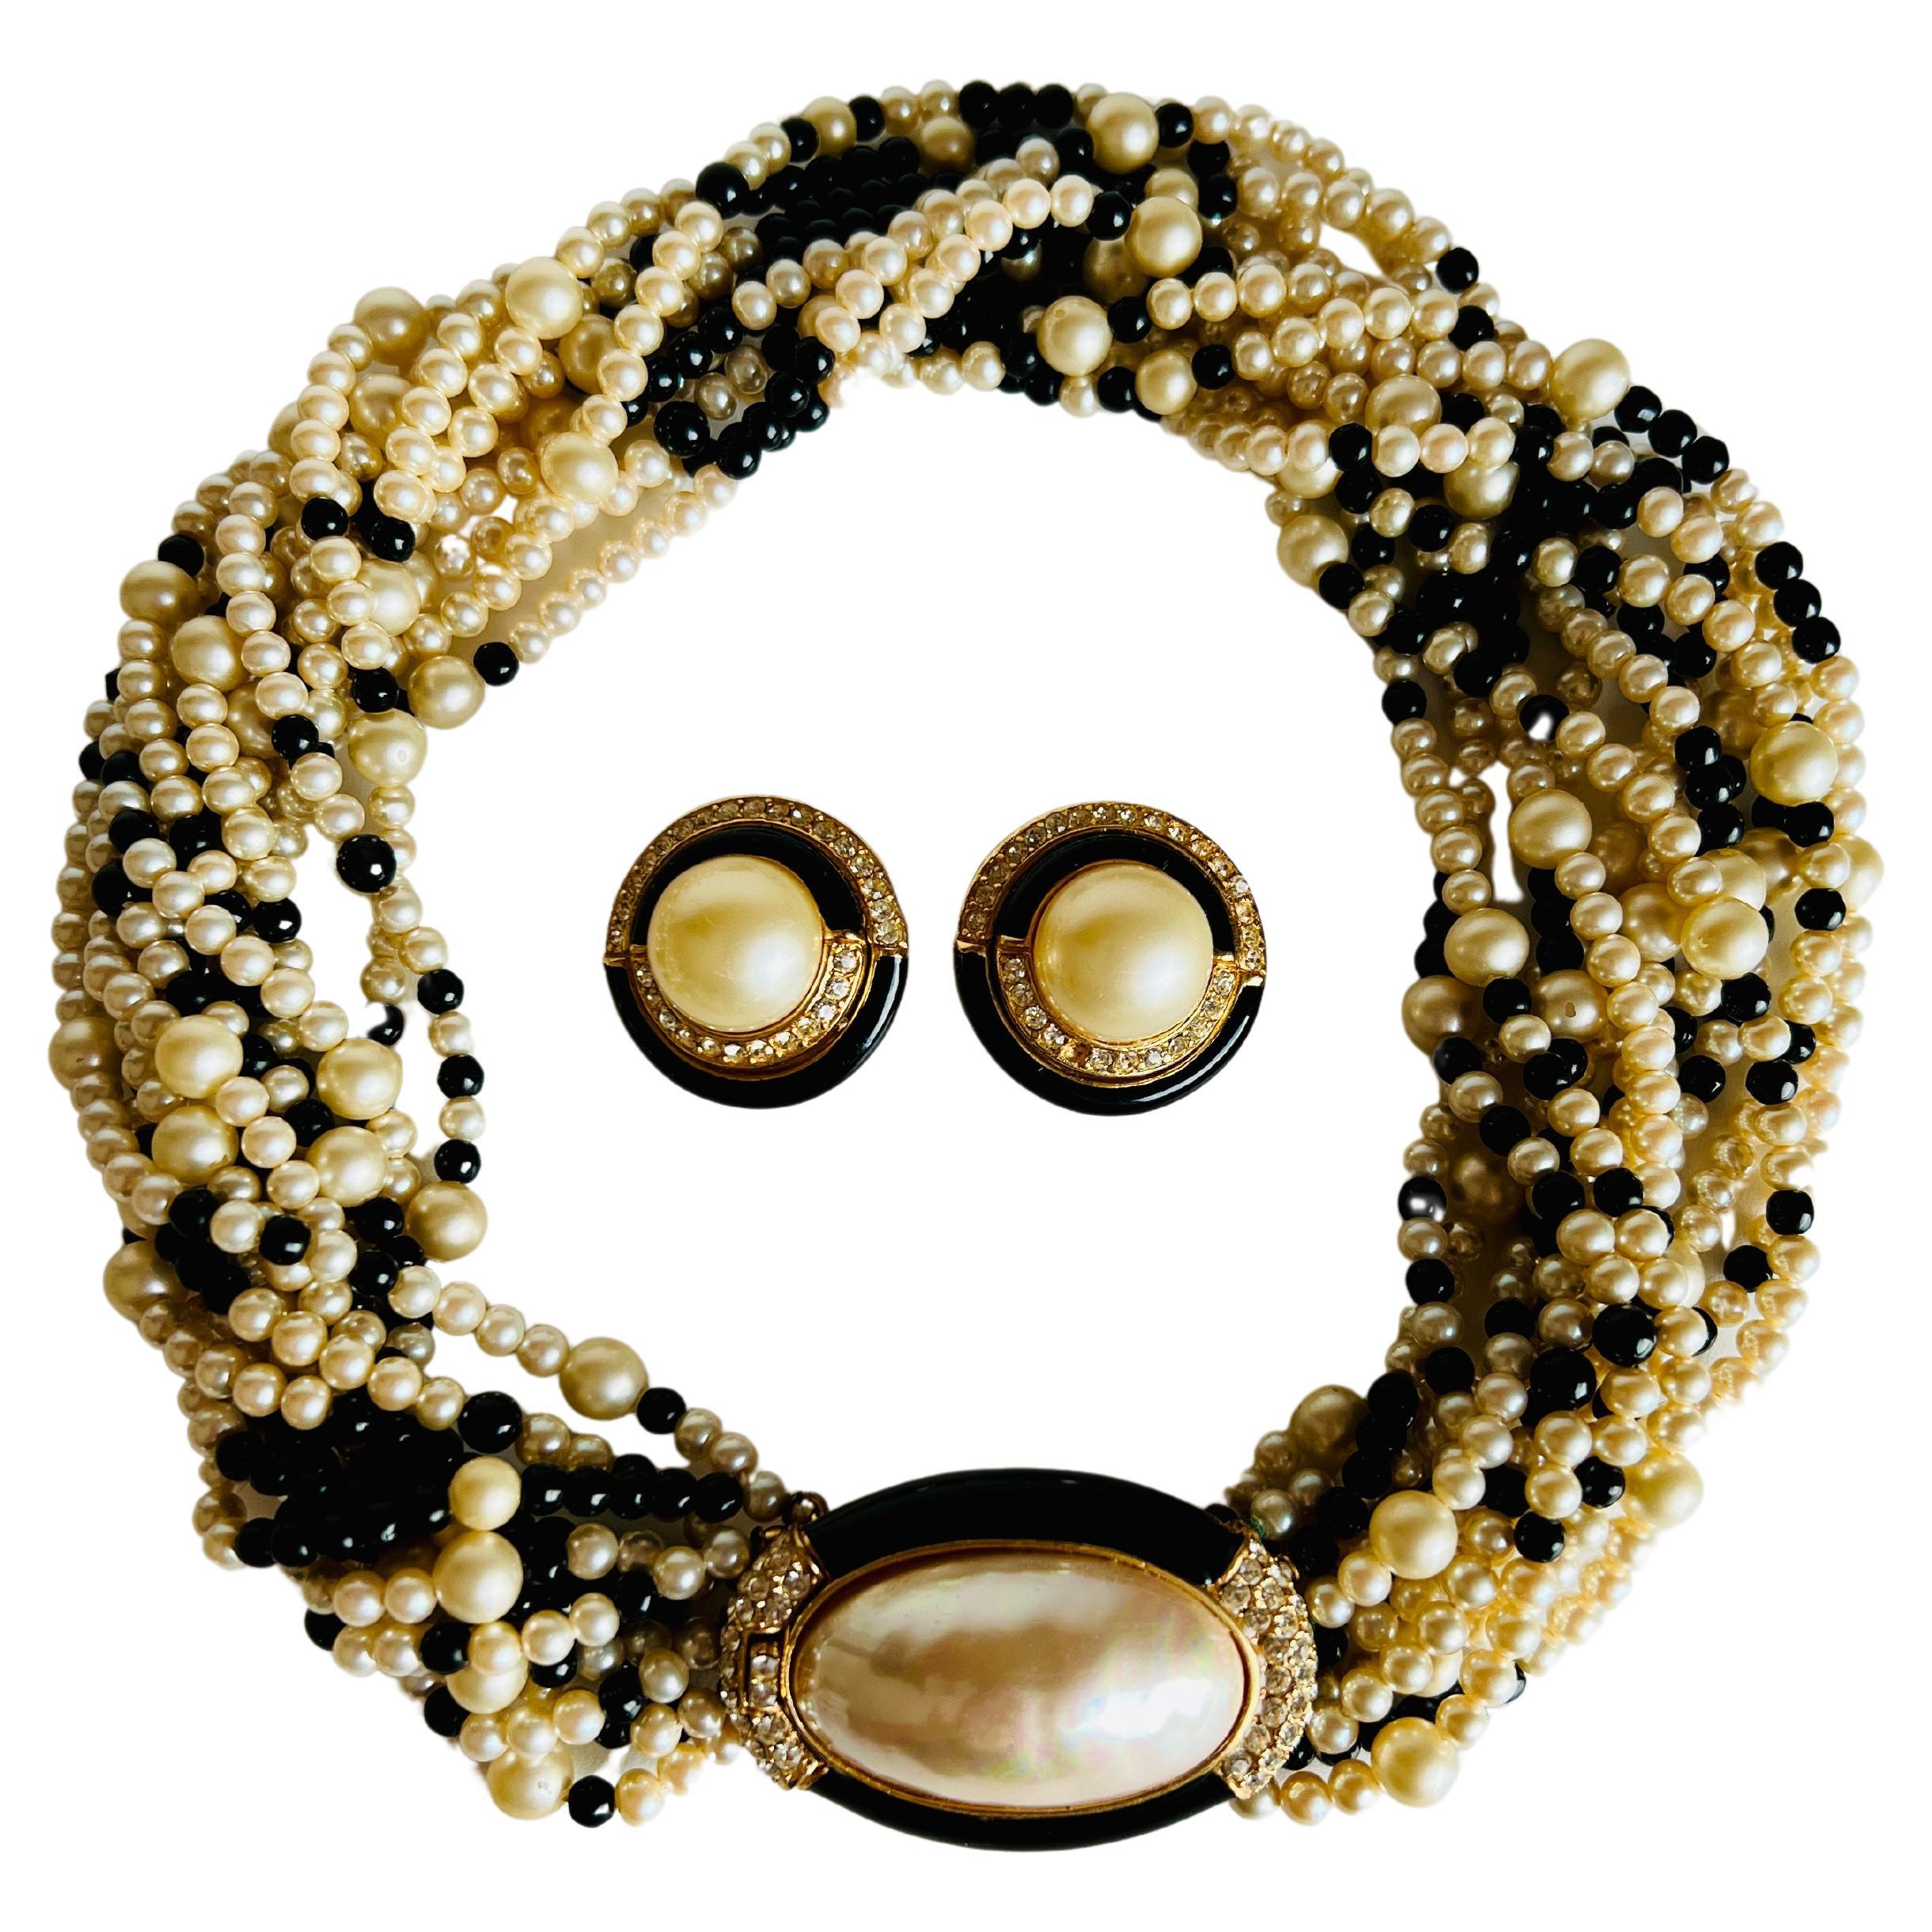 This elegant set includes an imitation pearl, black glass torsade necklace featuring a gold-tone clasp centering an imitation mabe-style pearl highlighted with rhinestones and black enamel together with a pair of matching clip on earrings.

Size: